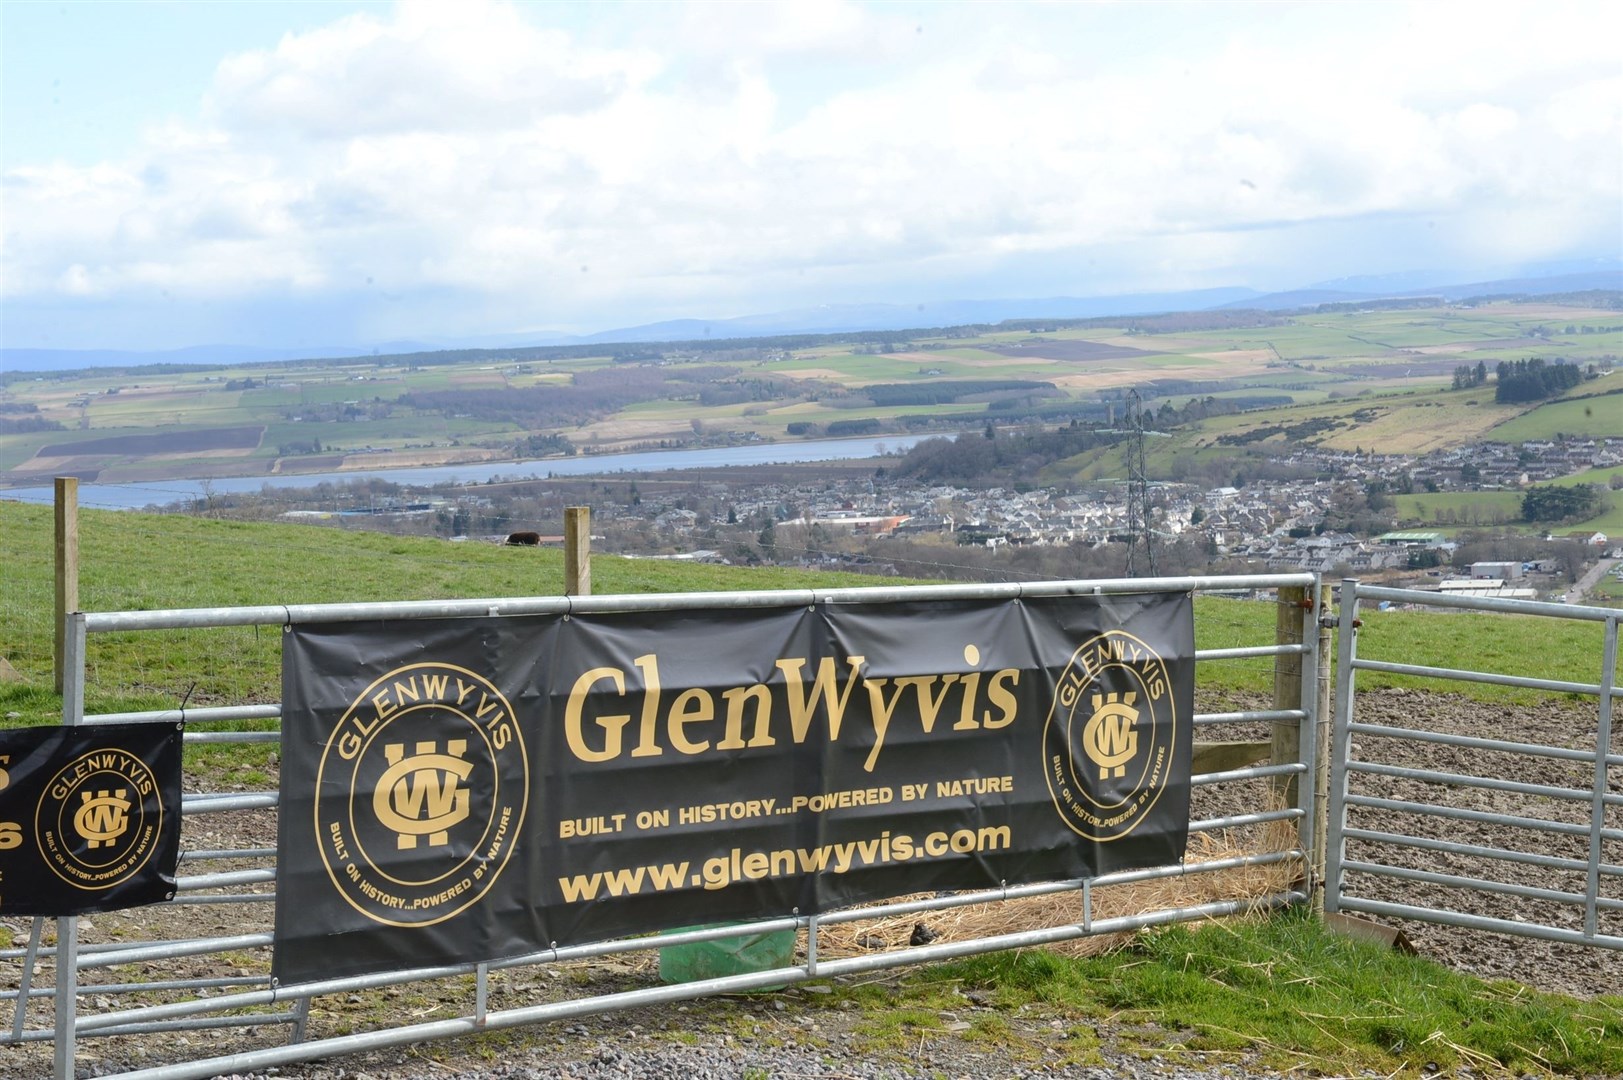 GlenWyvis Distillery is based at the farm.